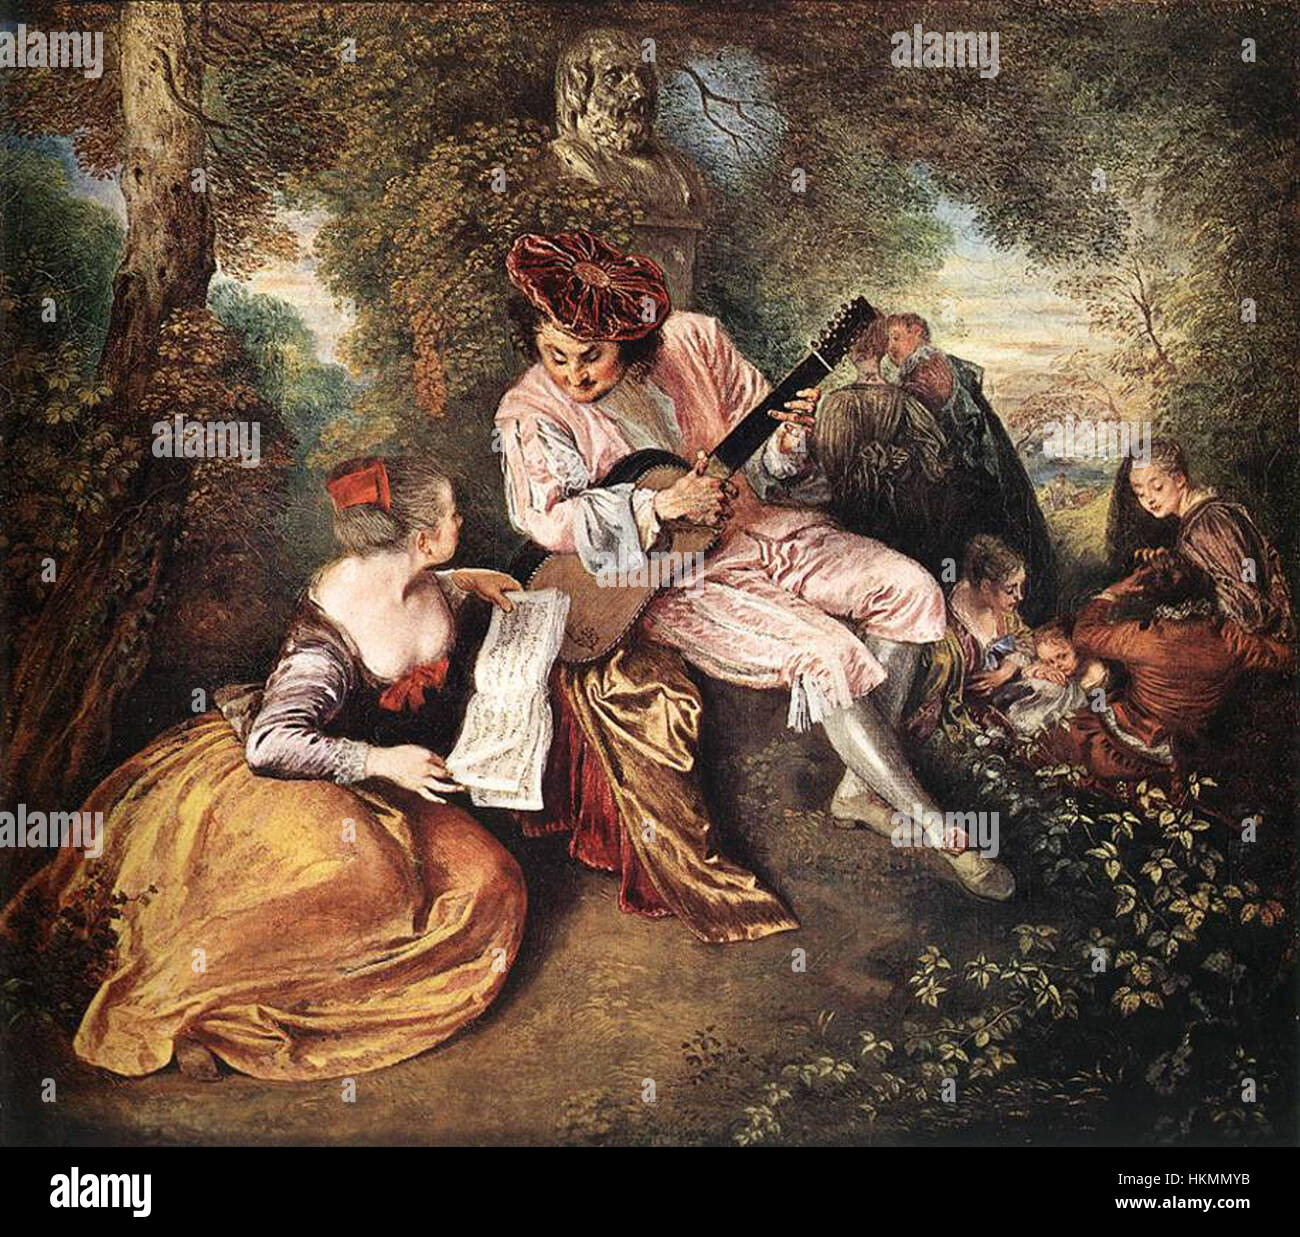 Antoine Watteau - 'La gamme d'amour' (The Love Song) - WGA25457 Stock Photo